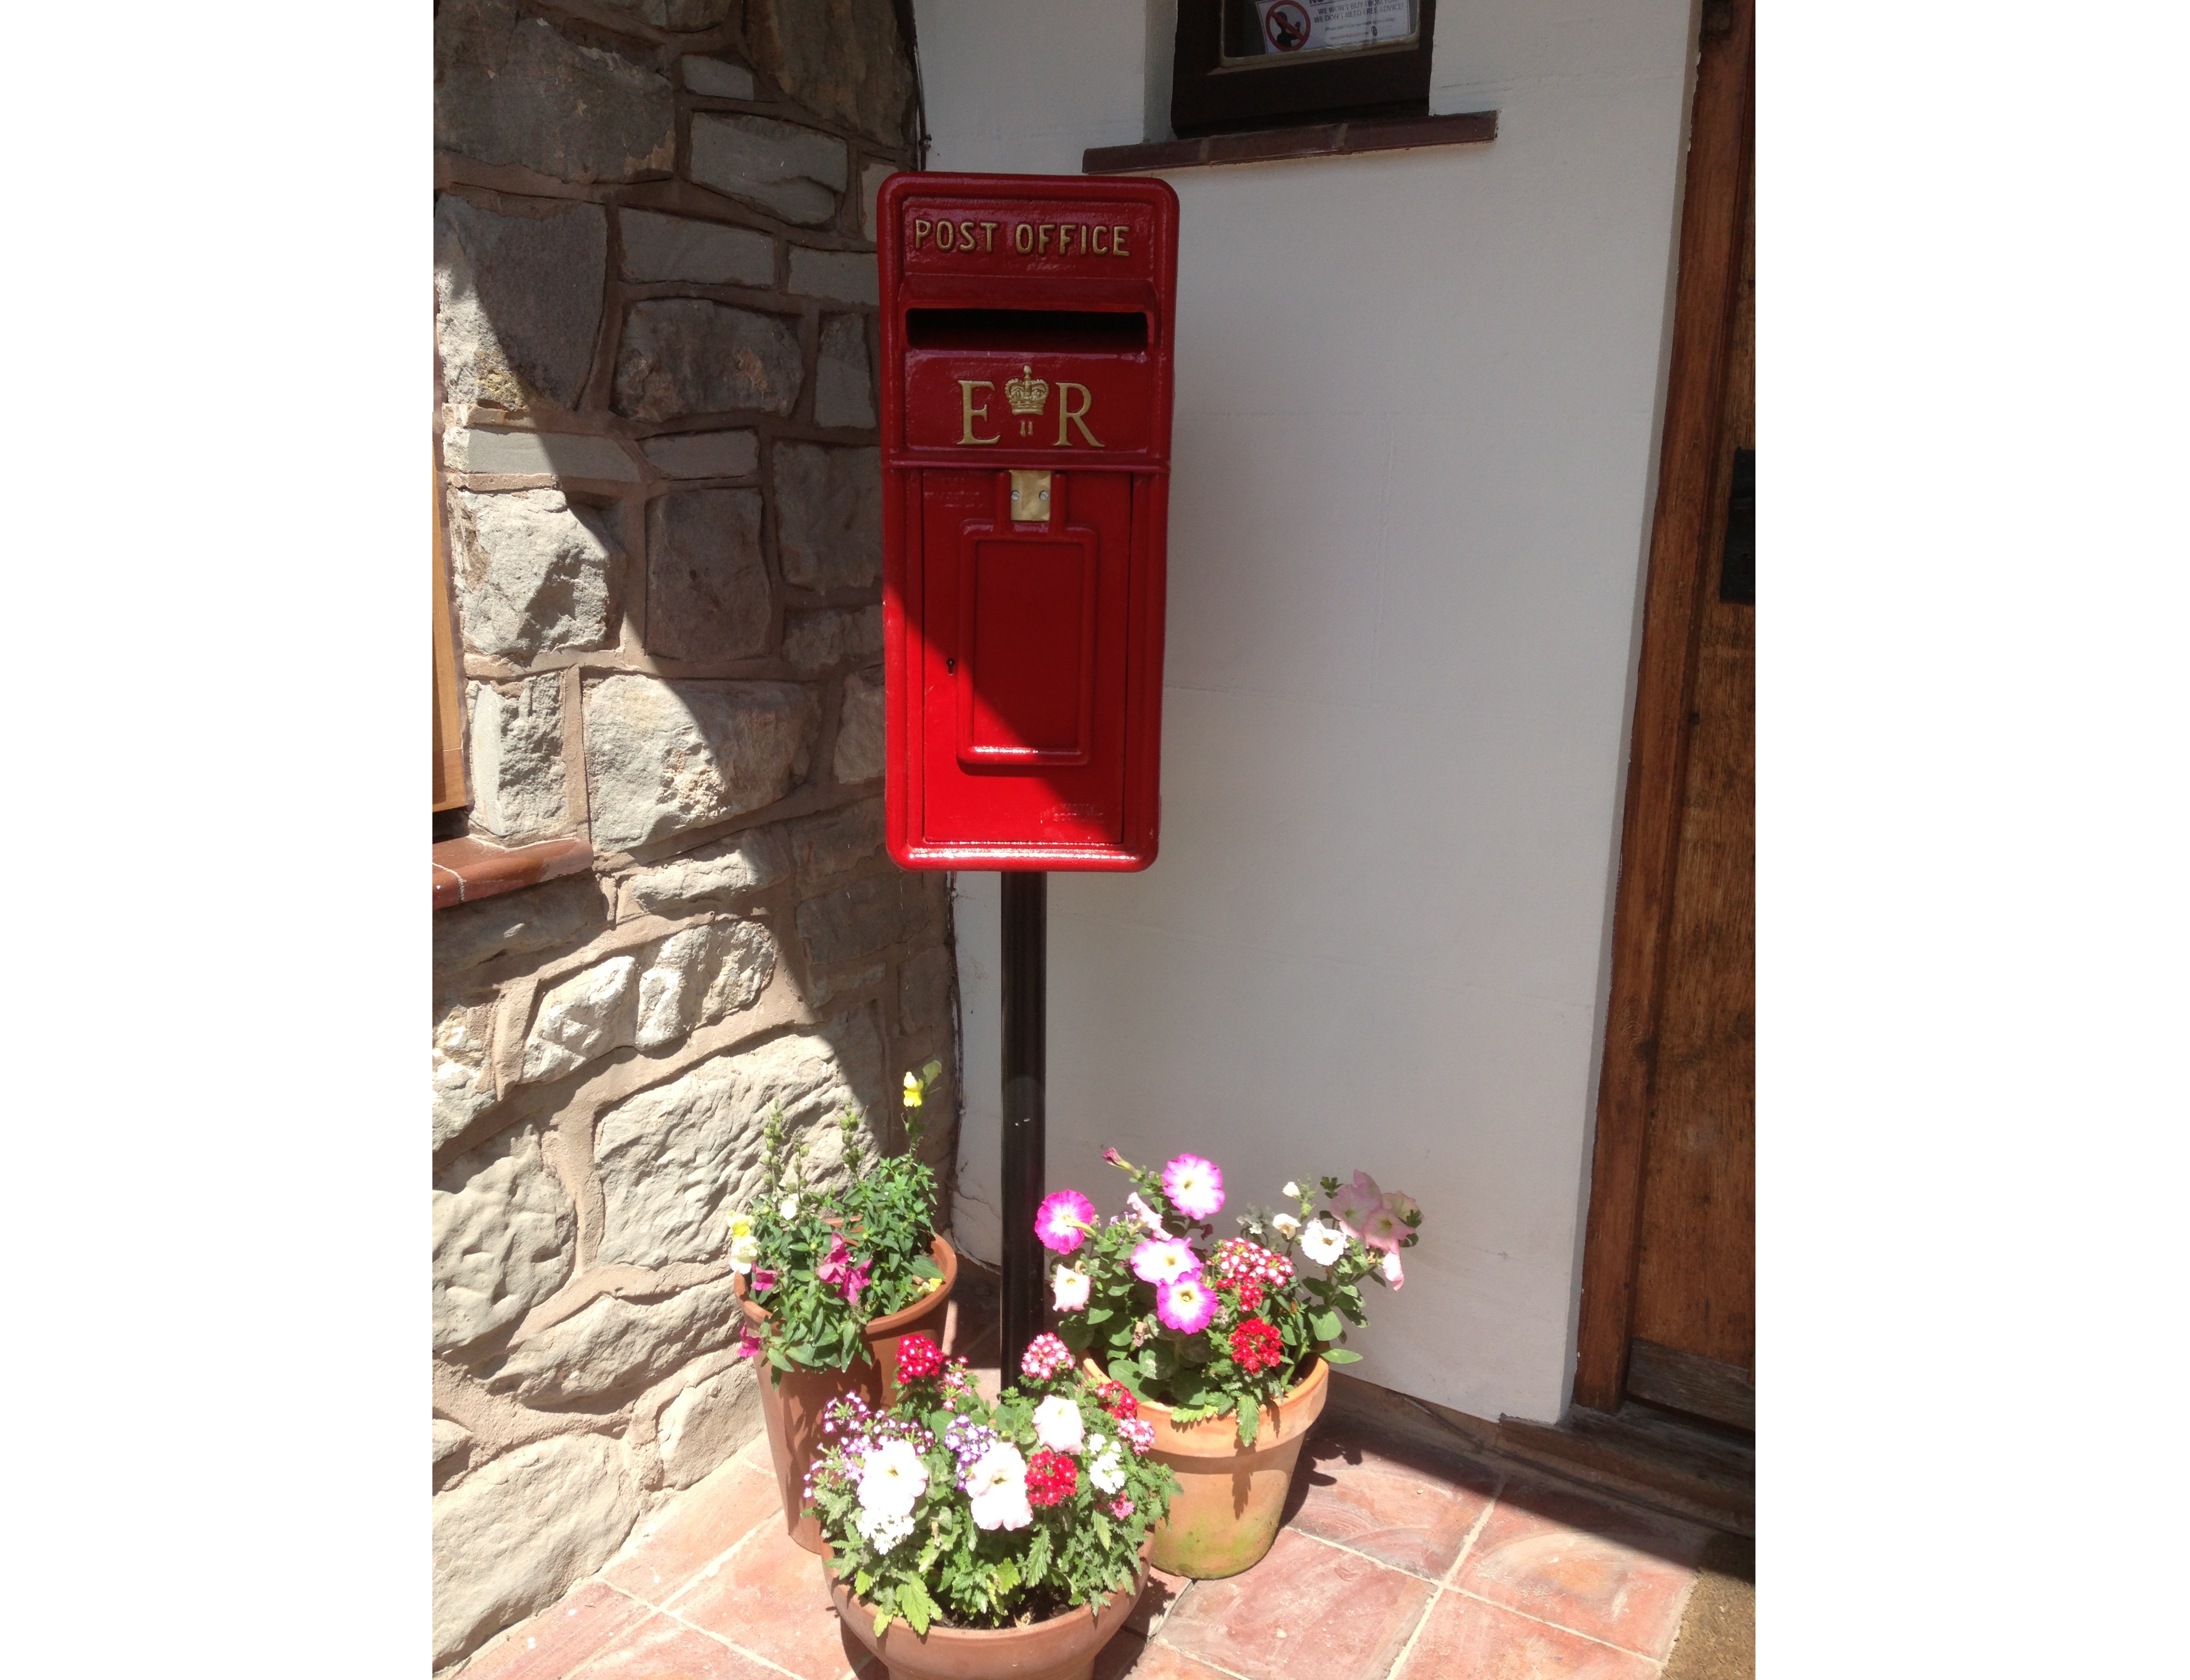 UKAA have Royal Mail Post Boxes For Sale